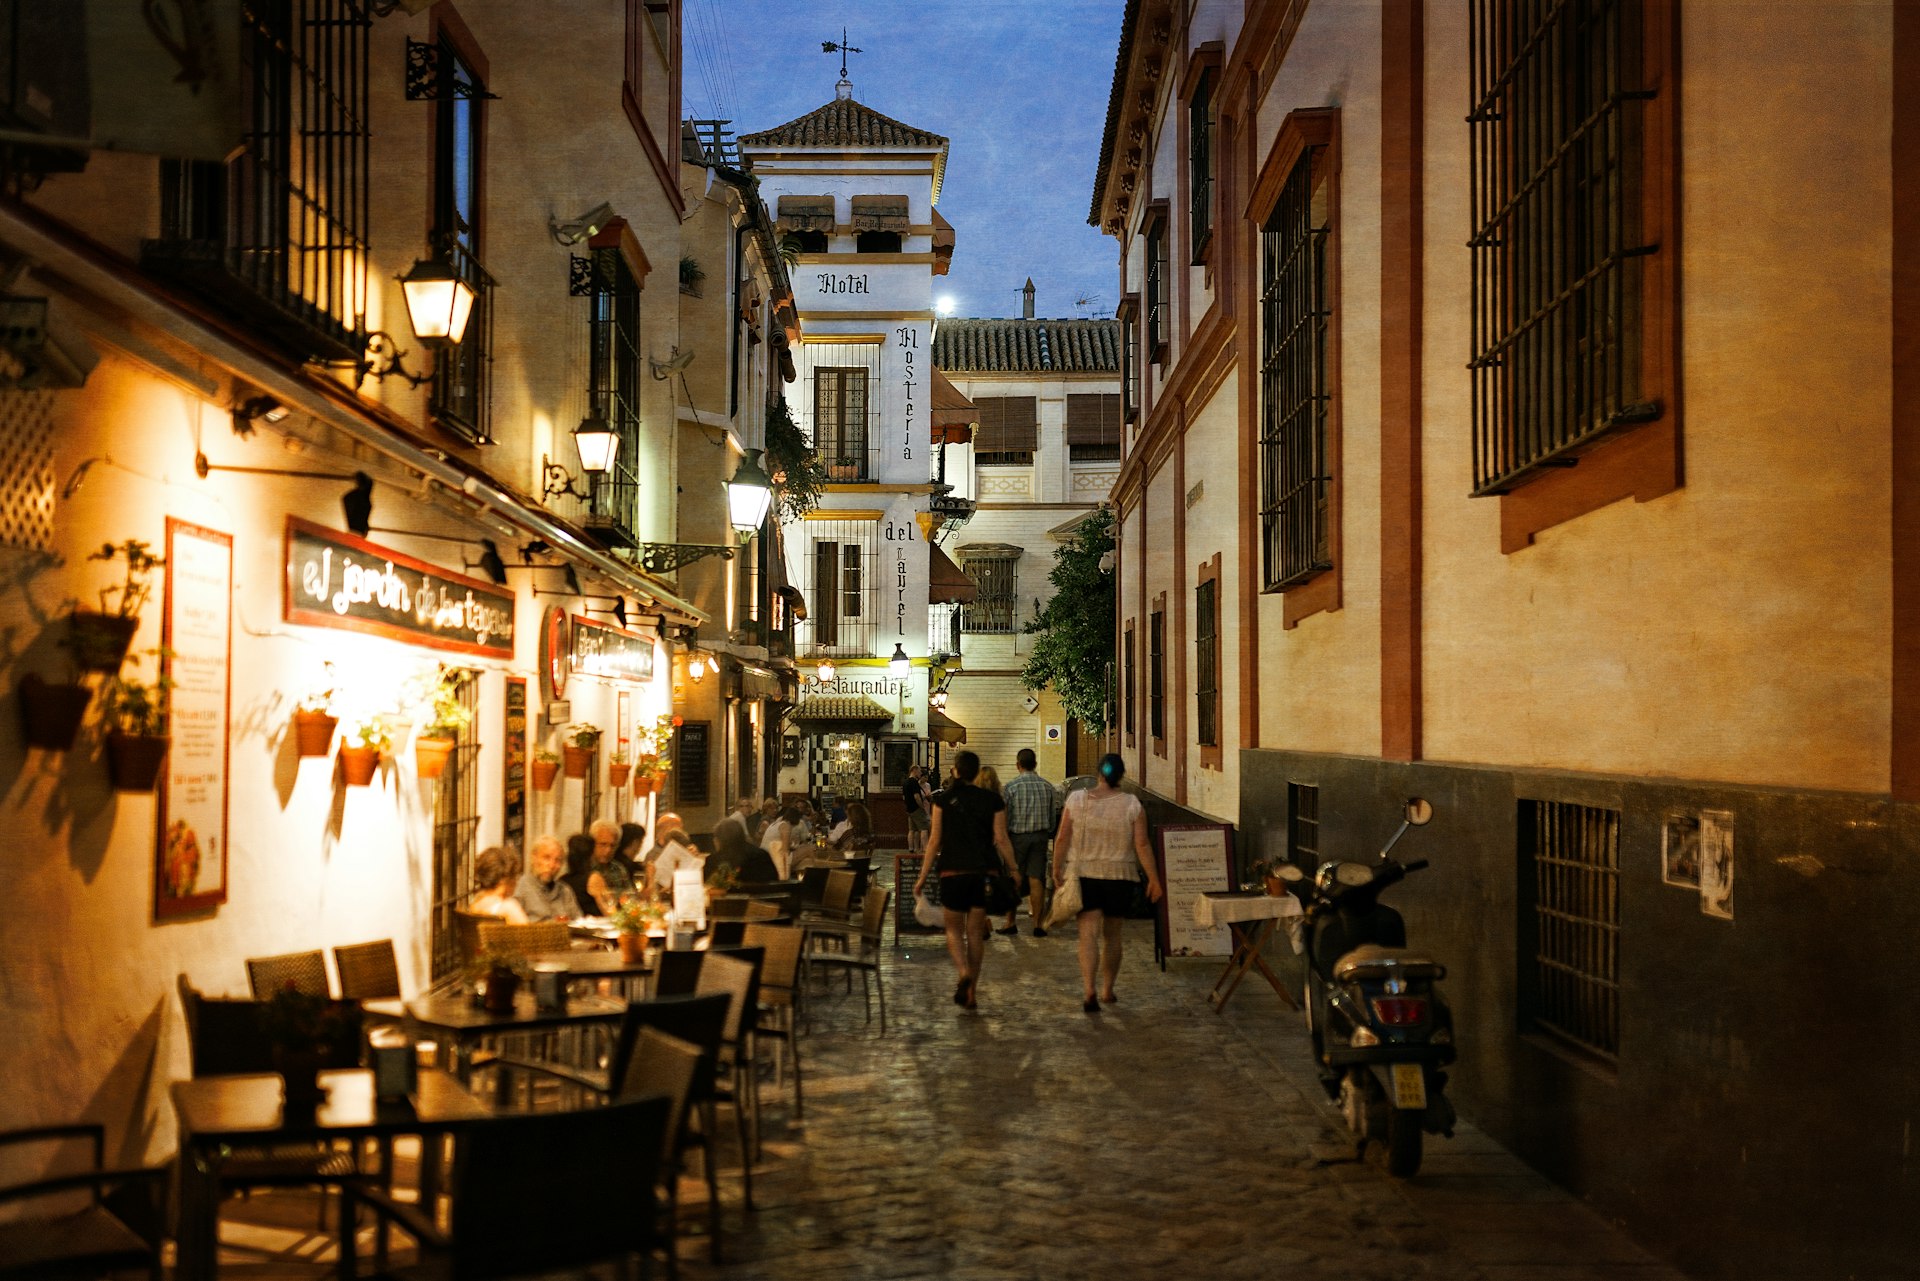 People walk by tables on an outdoor terrace of a restaurant in a narrow side street in Seville, Spain